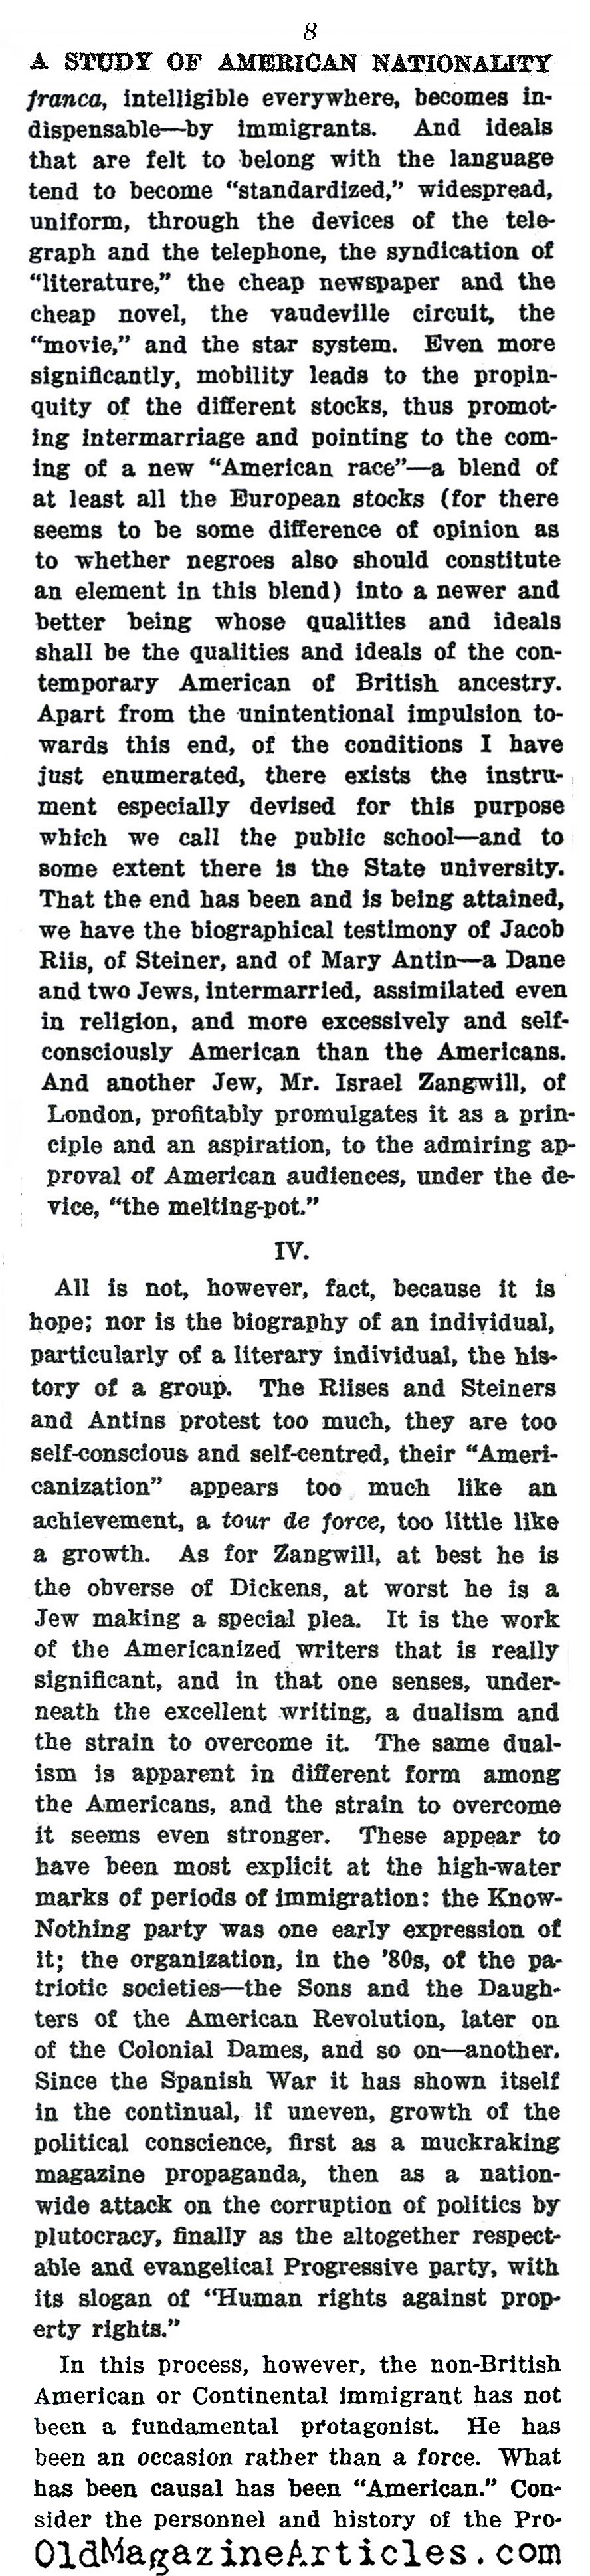 Anticipating Multiculturalism  (The Nation, 1915)